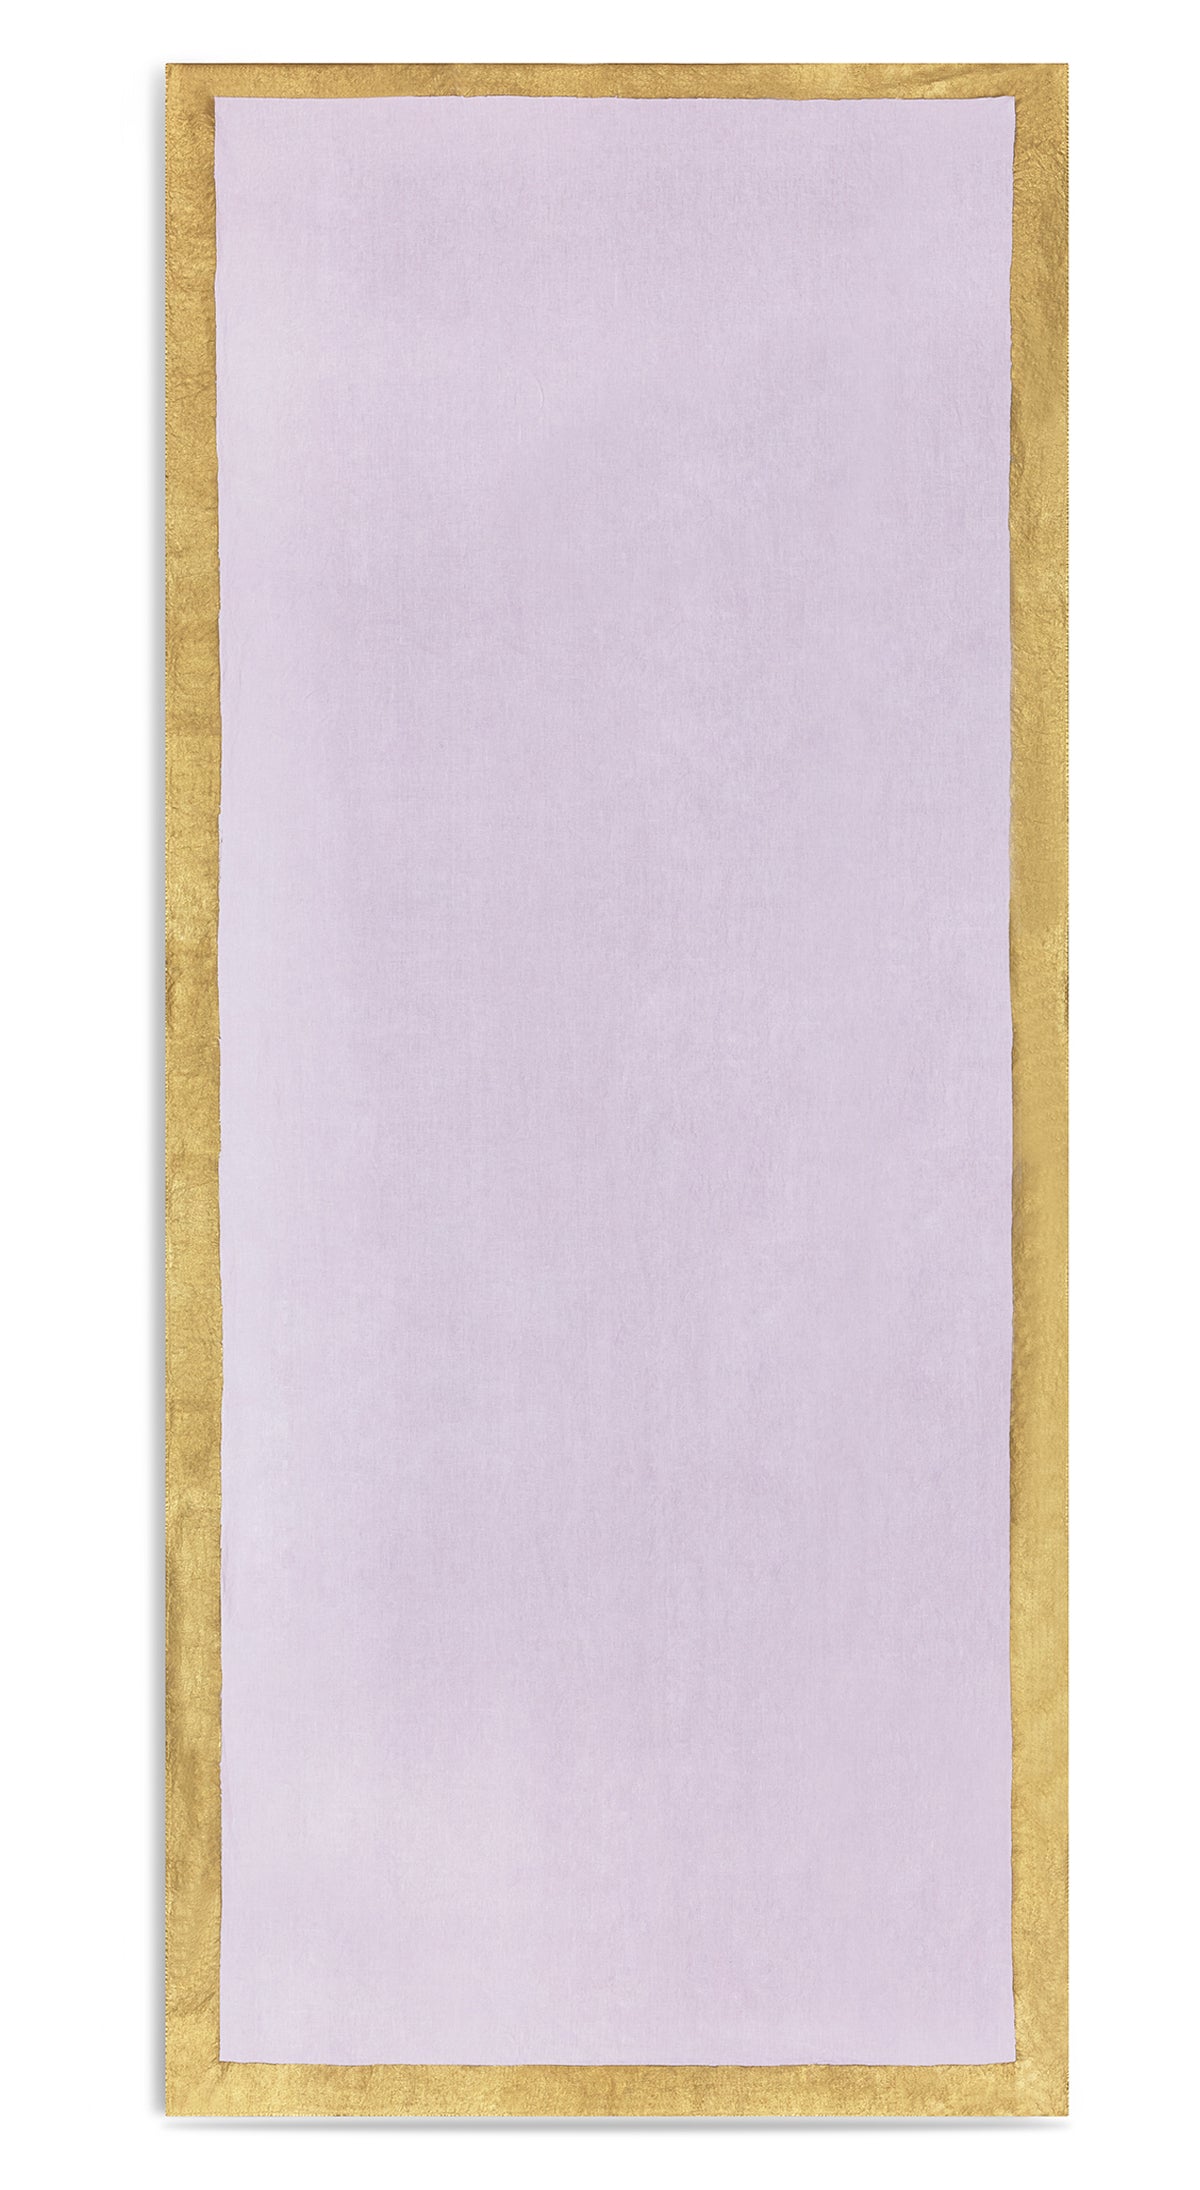 Gold Edge Linen Tablecloth in Pale Pink